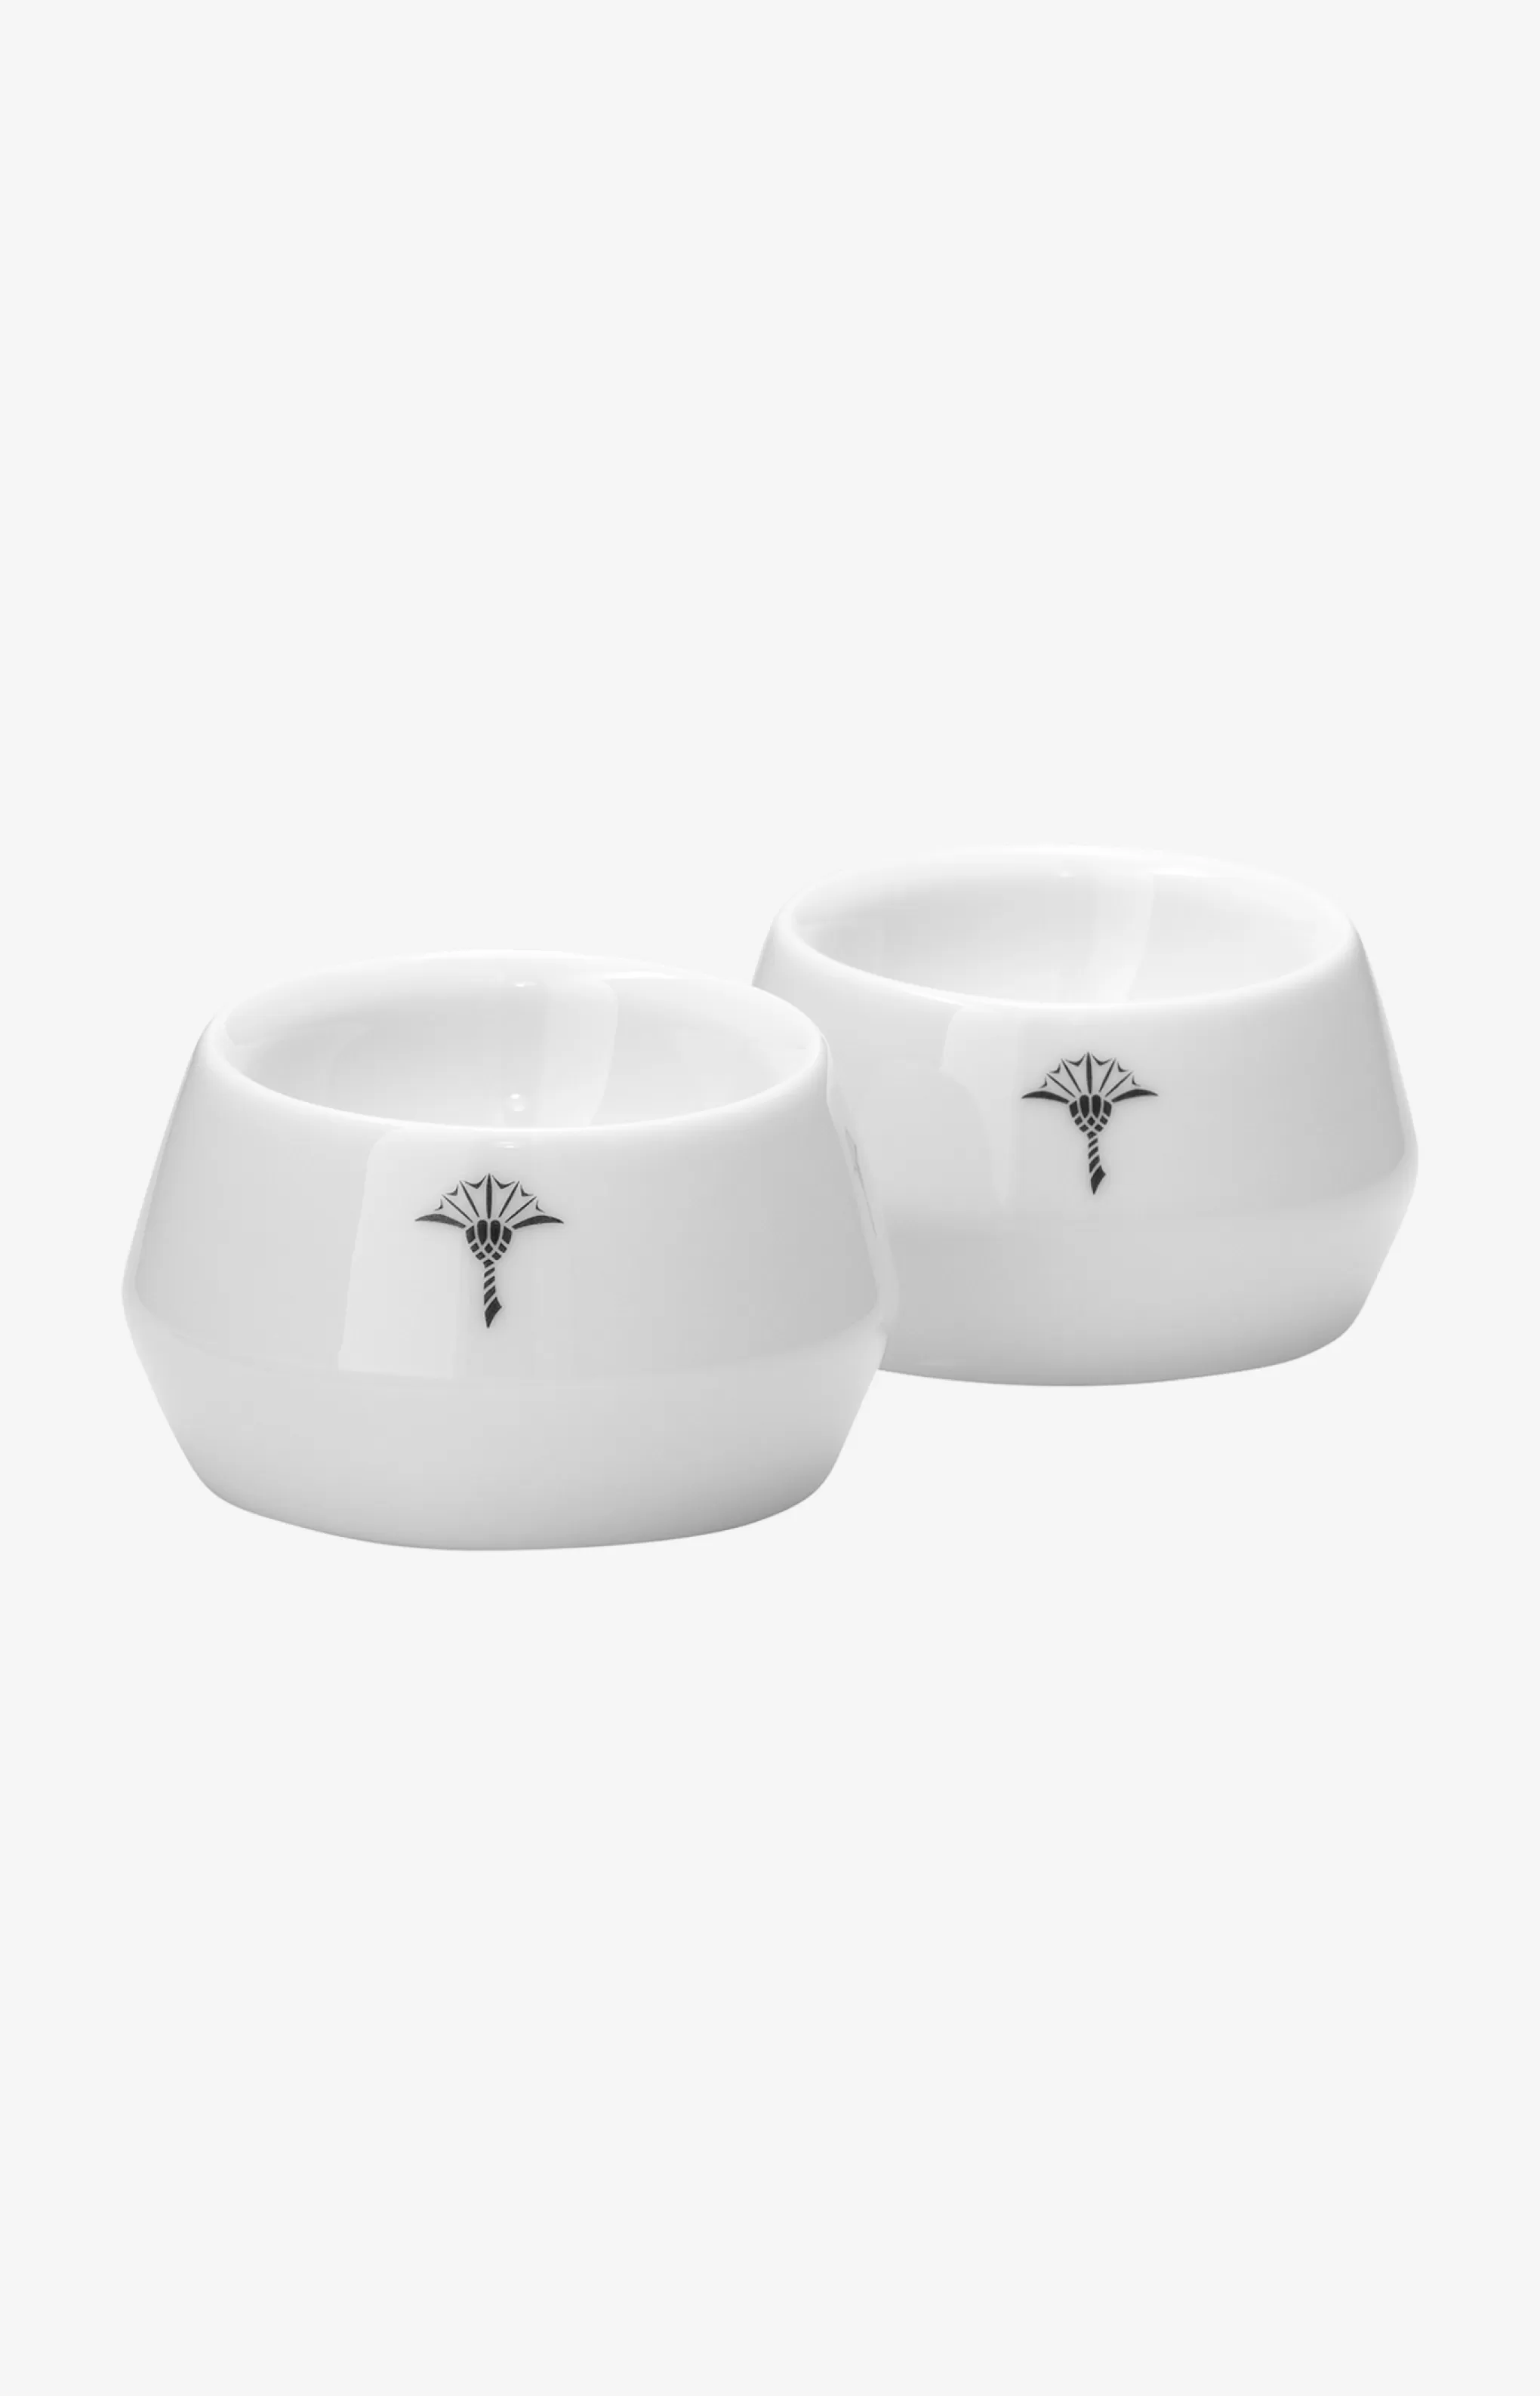 Tableware | Discover Everything*JOOP Tableware | Discover Everything Single Cornflower Egg Cups - Set of 2 in